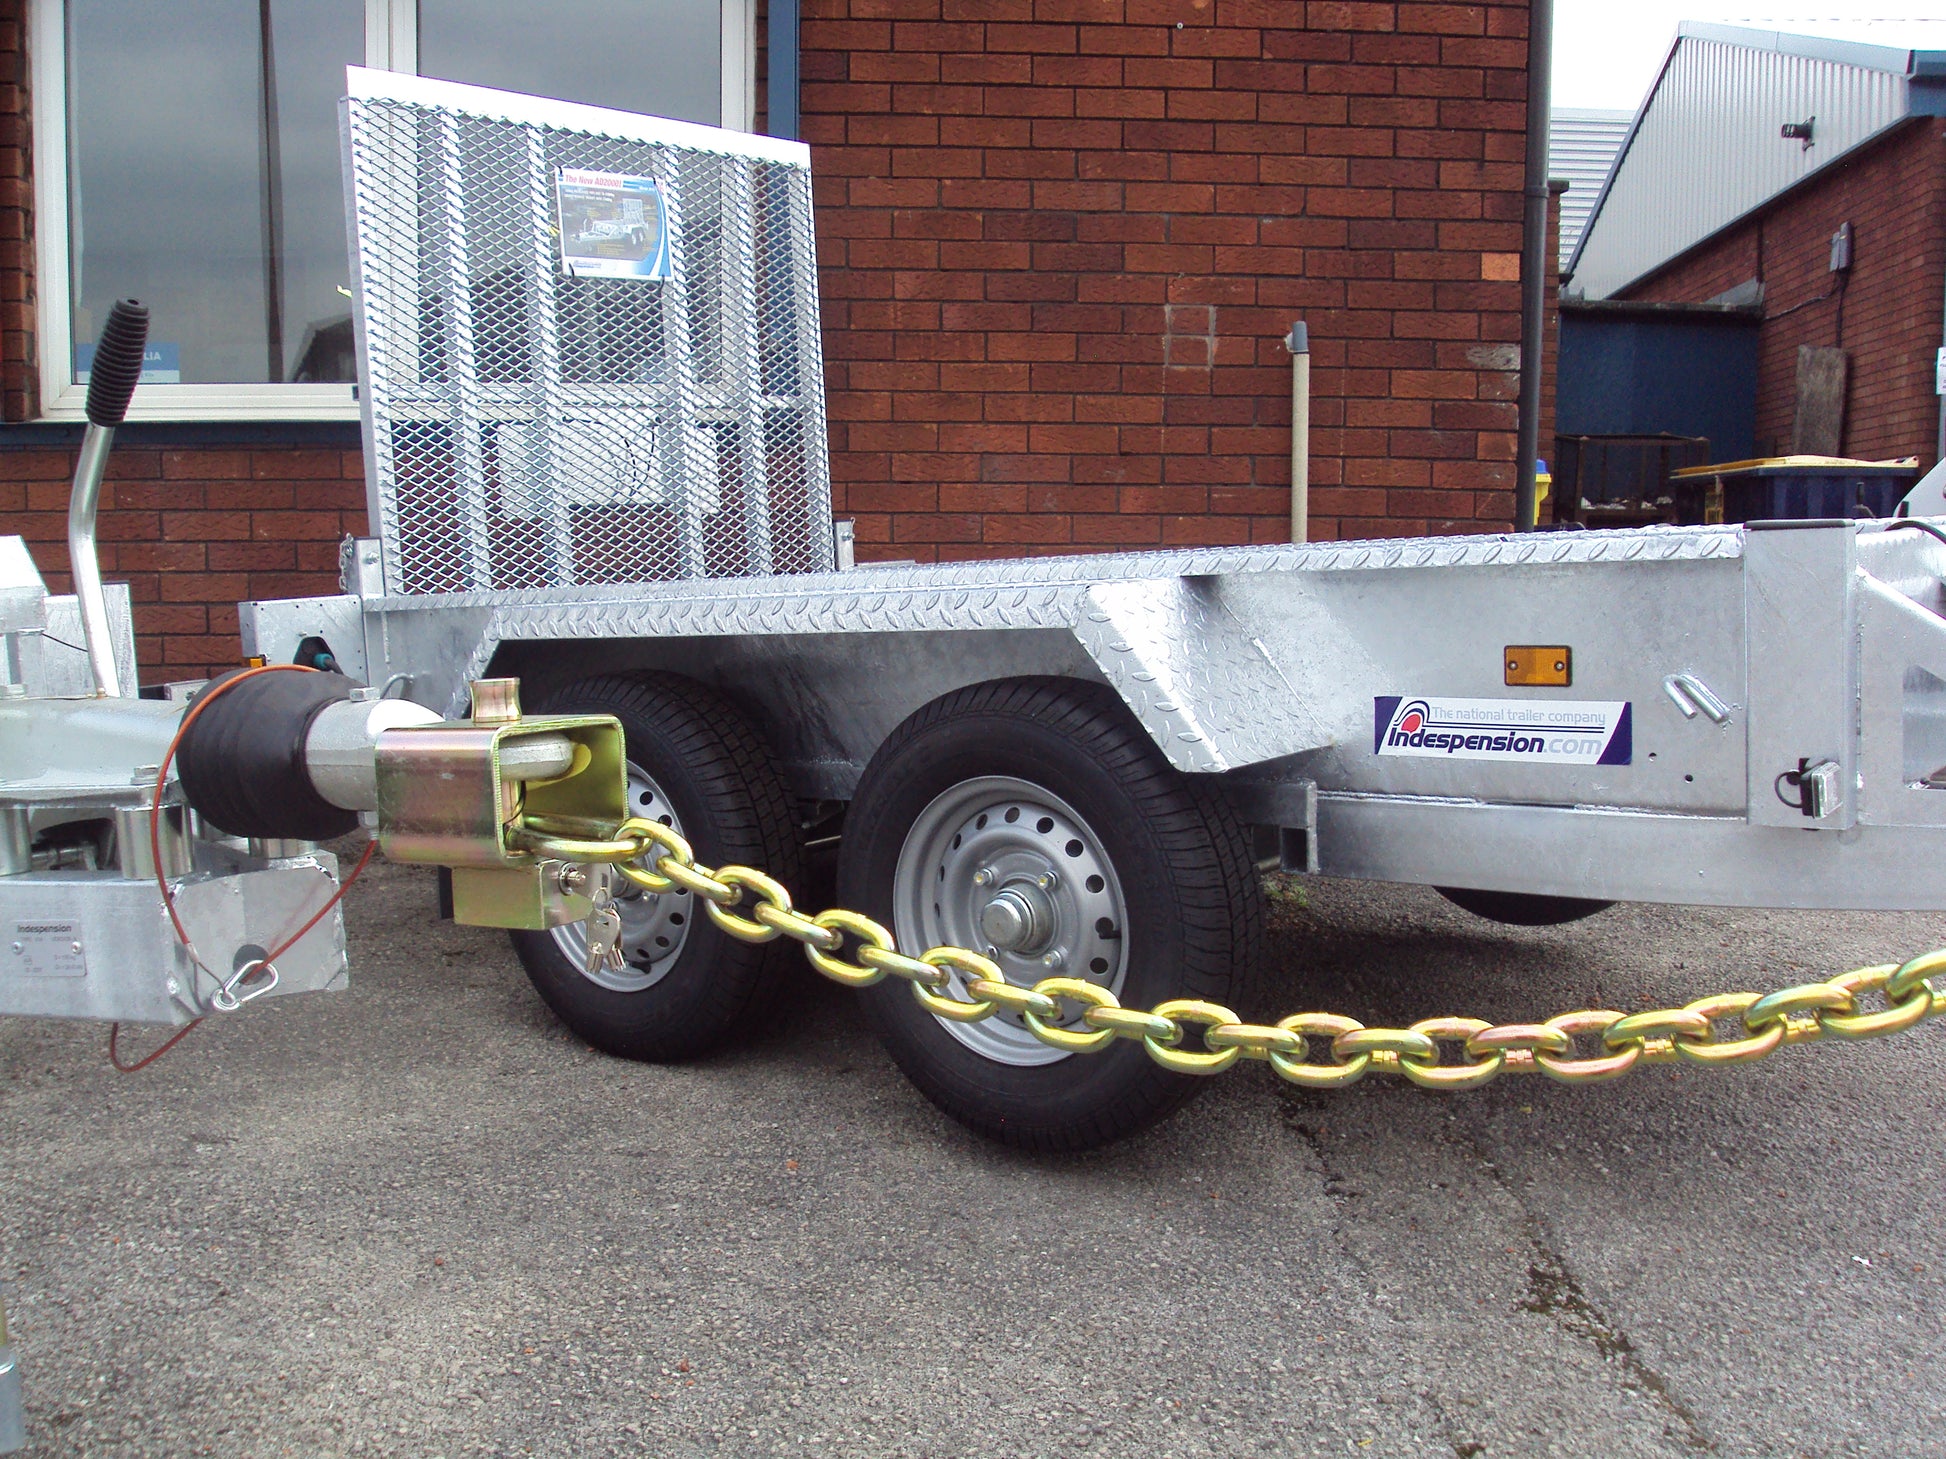 Towing Eye Box Lock, showed with our 13mm Security Chain